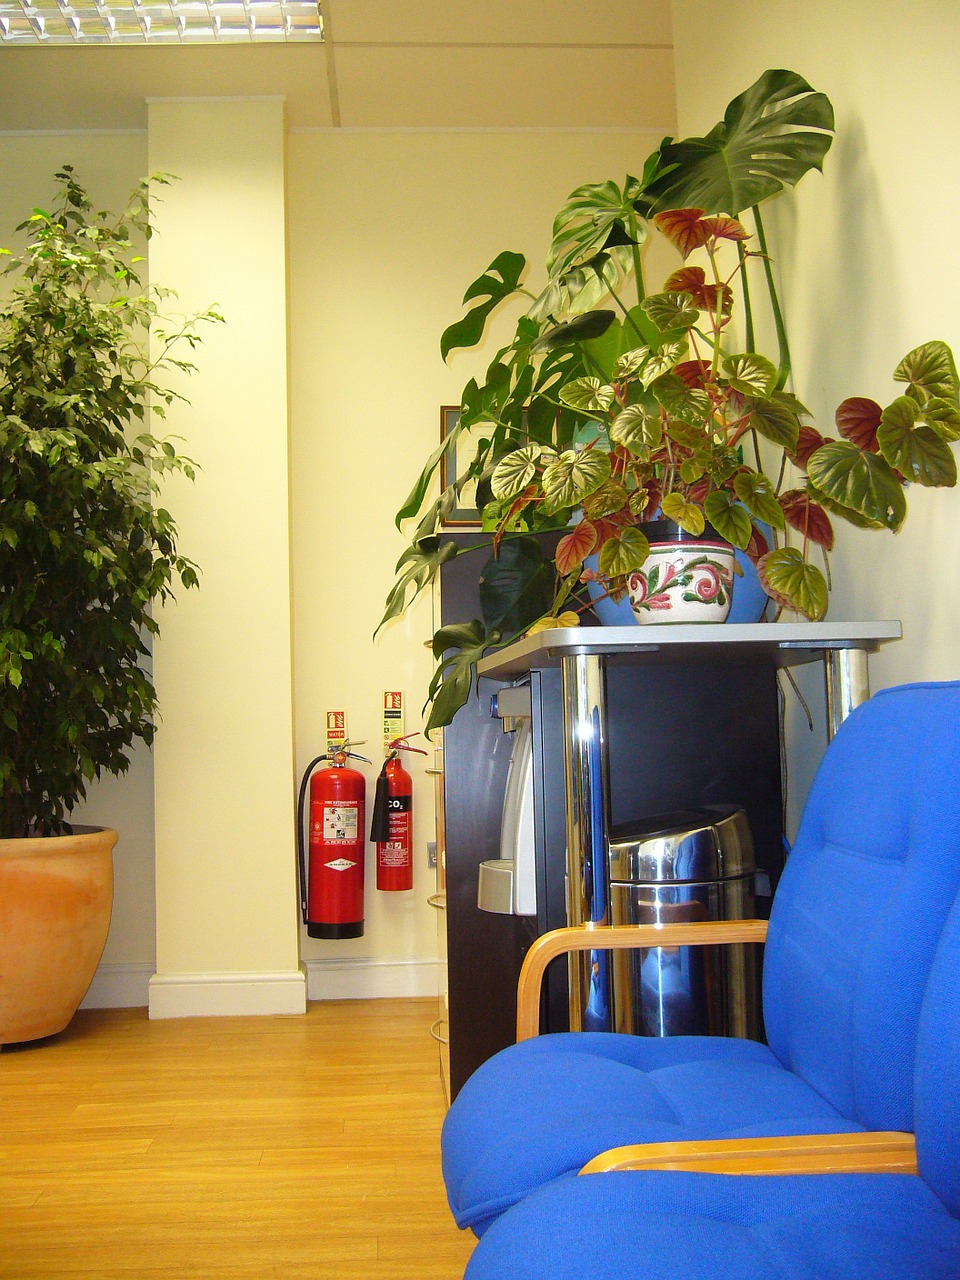 waiting area chairs indoor plants free photo